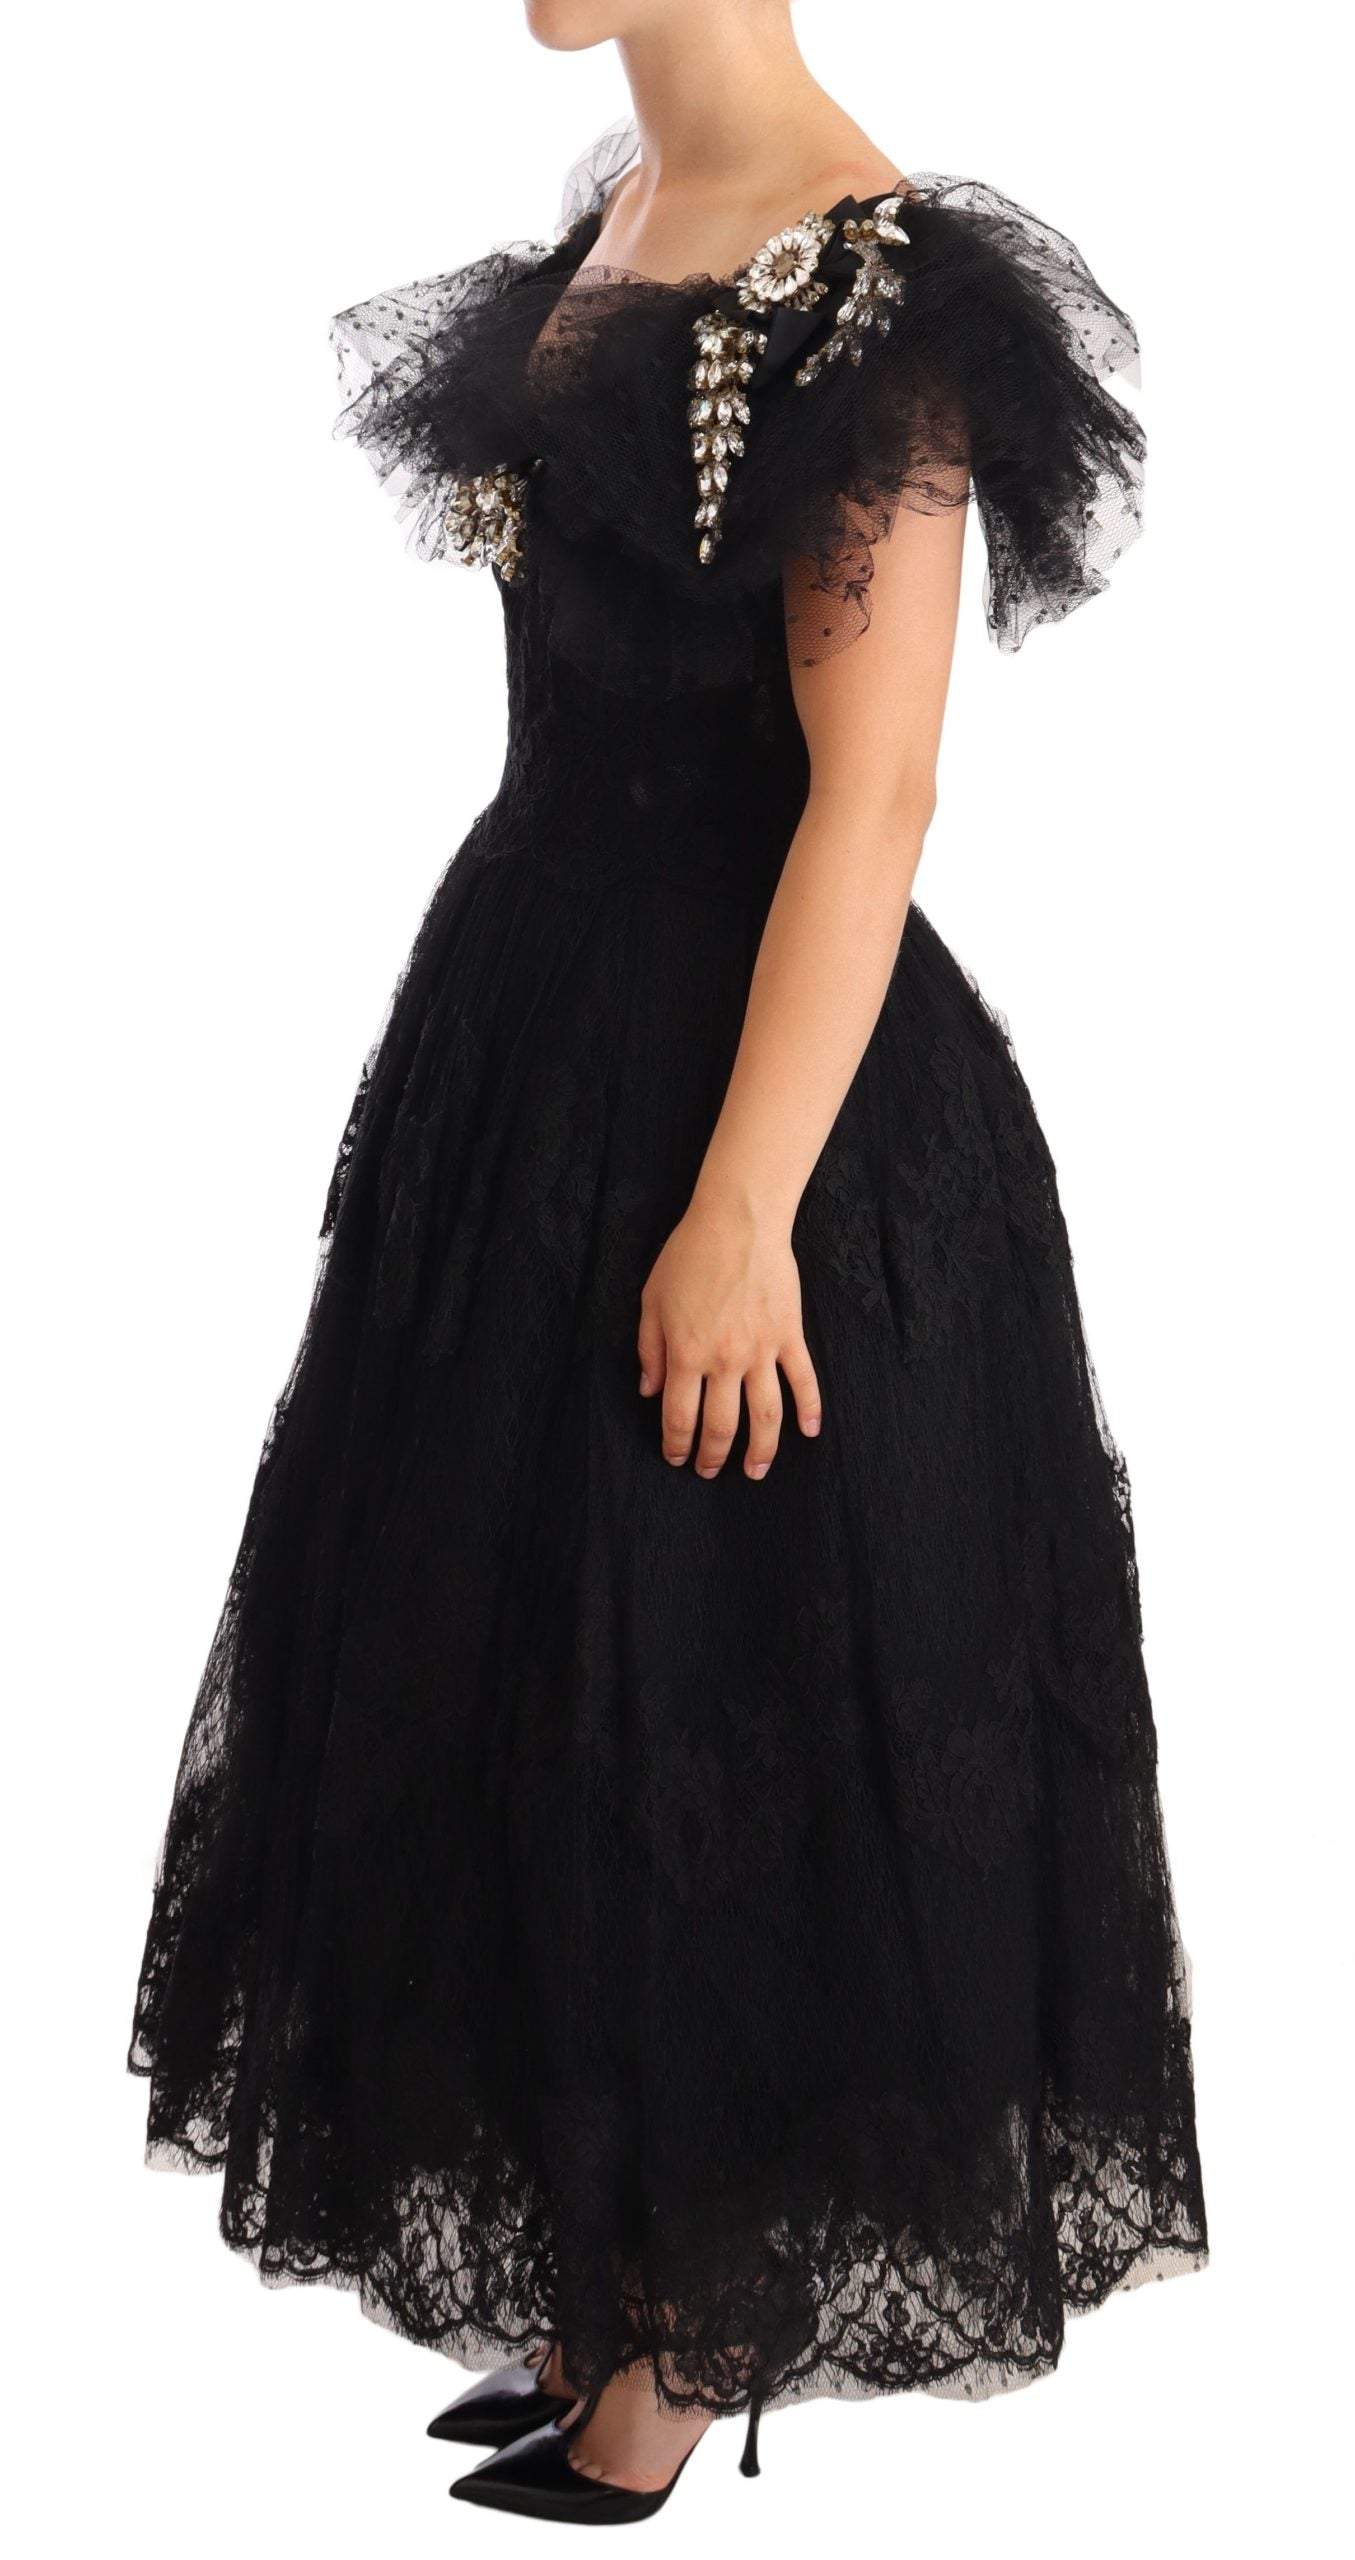 Dolce & Gabbana Black Floral Lace Crystal Ball Gown Dress Black, Dolce & Gabbana, Dresses - Women - Clothing, feed-1, IT38 | S at SEYMAYKA